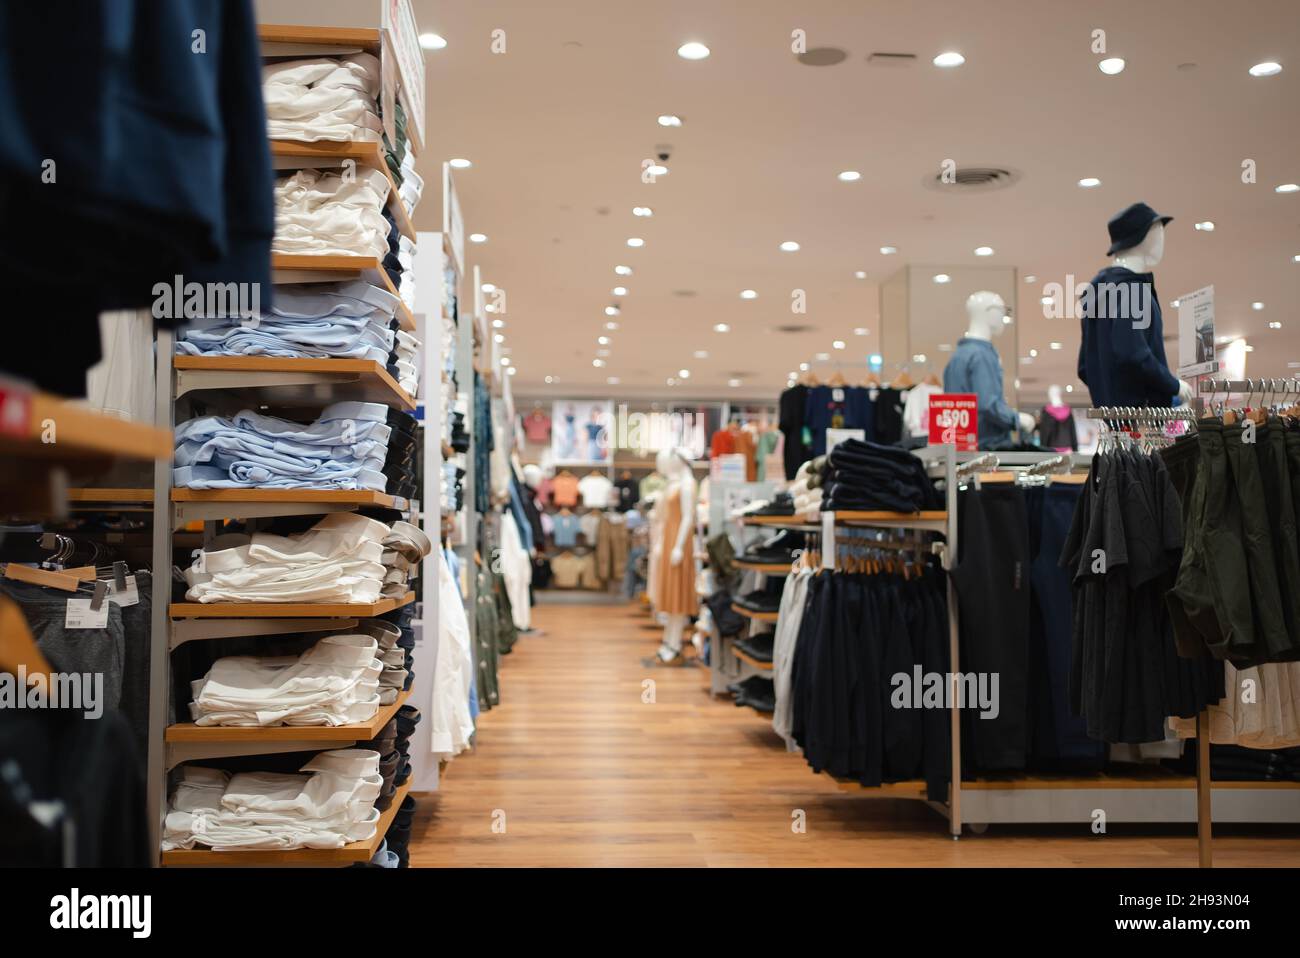 Interior view of clothing store in a shopping mall. Stock Photo